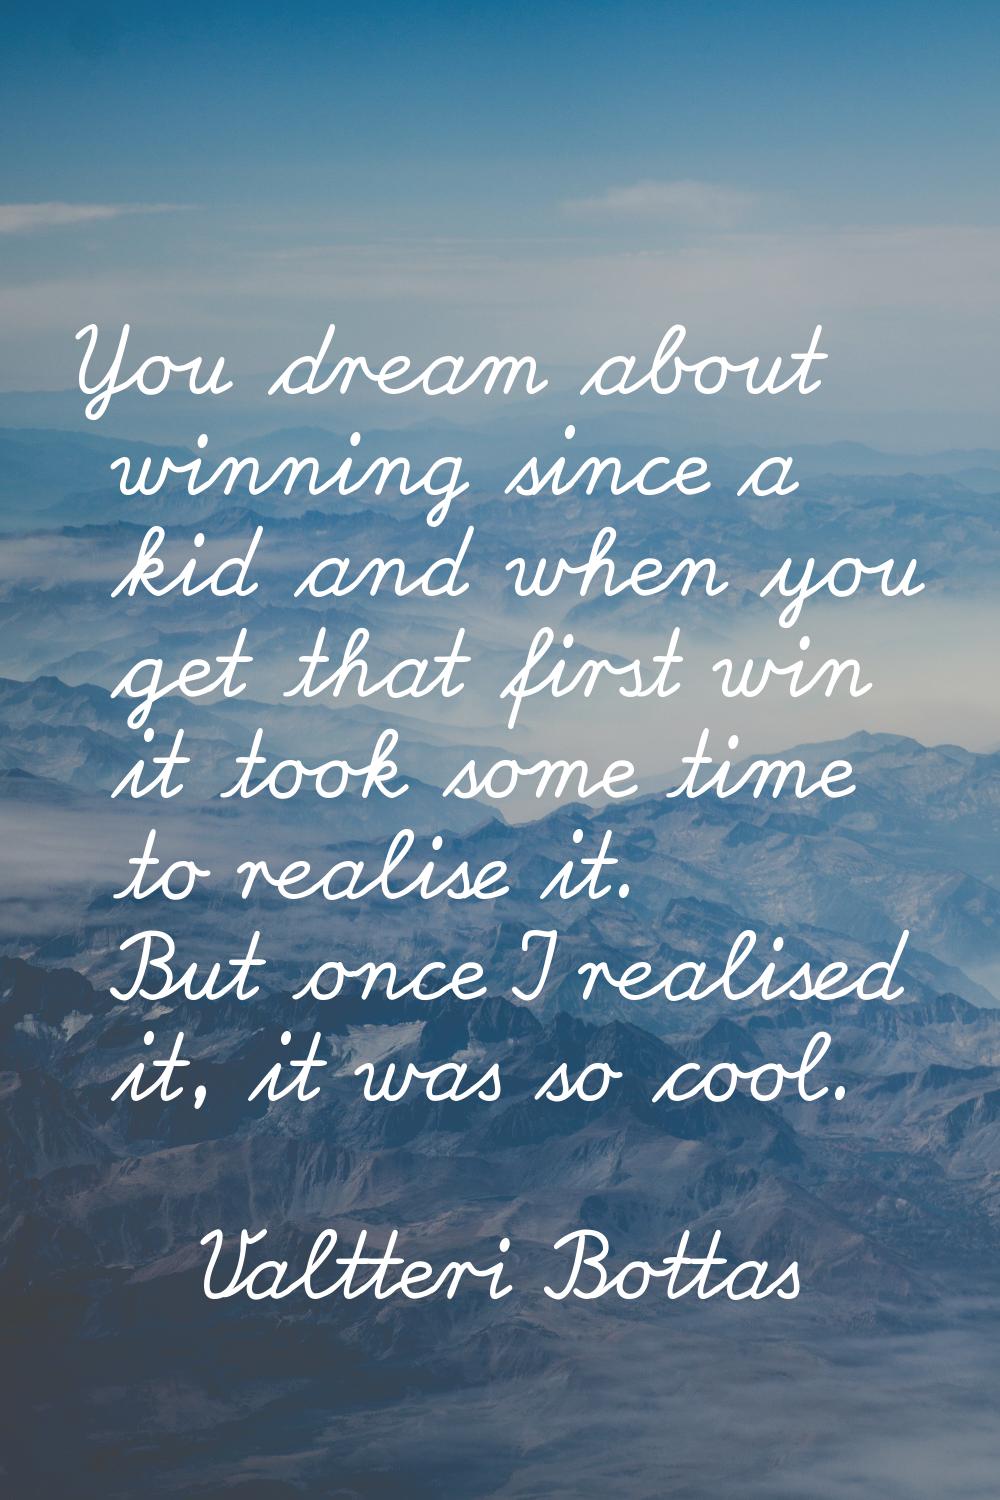 You dream about winning since a kid and when you get that first win it took some time to realise it